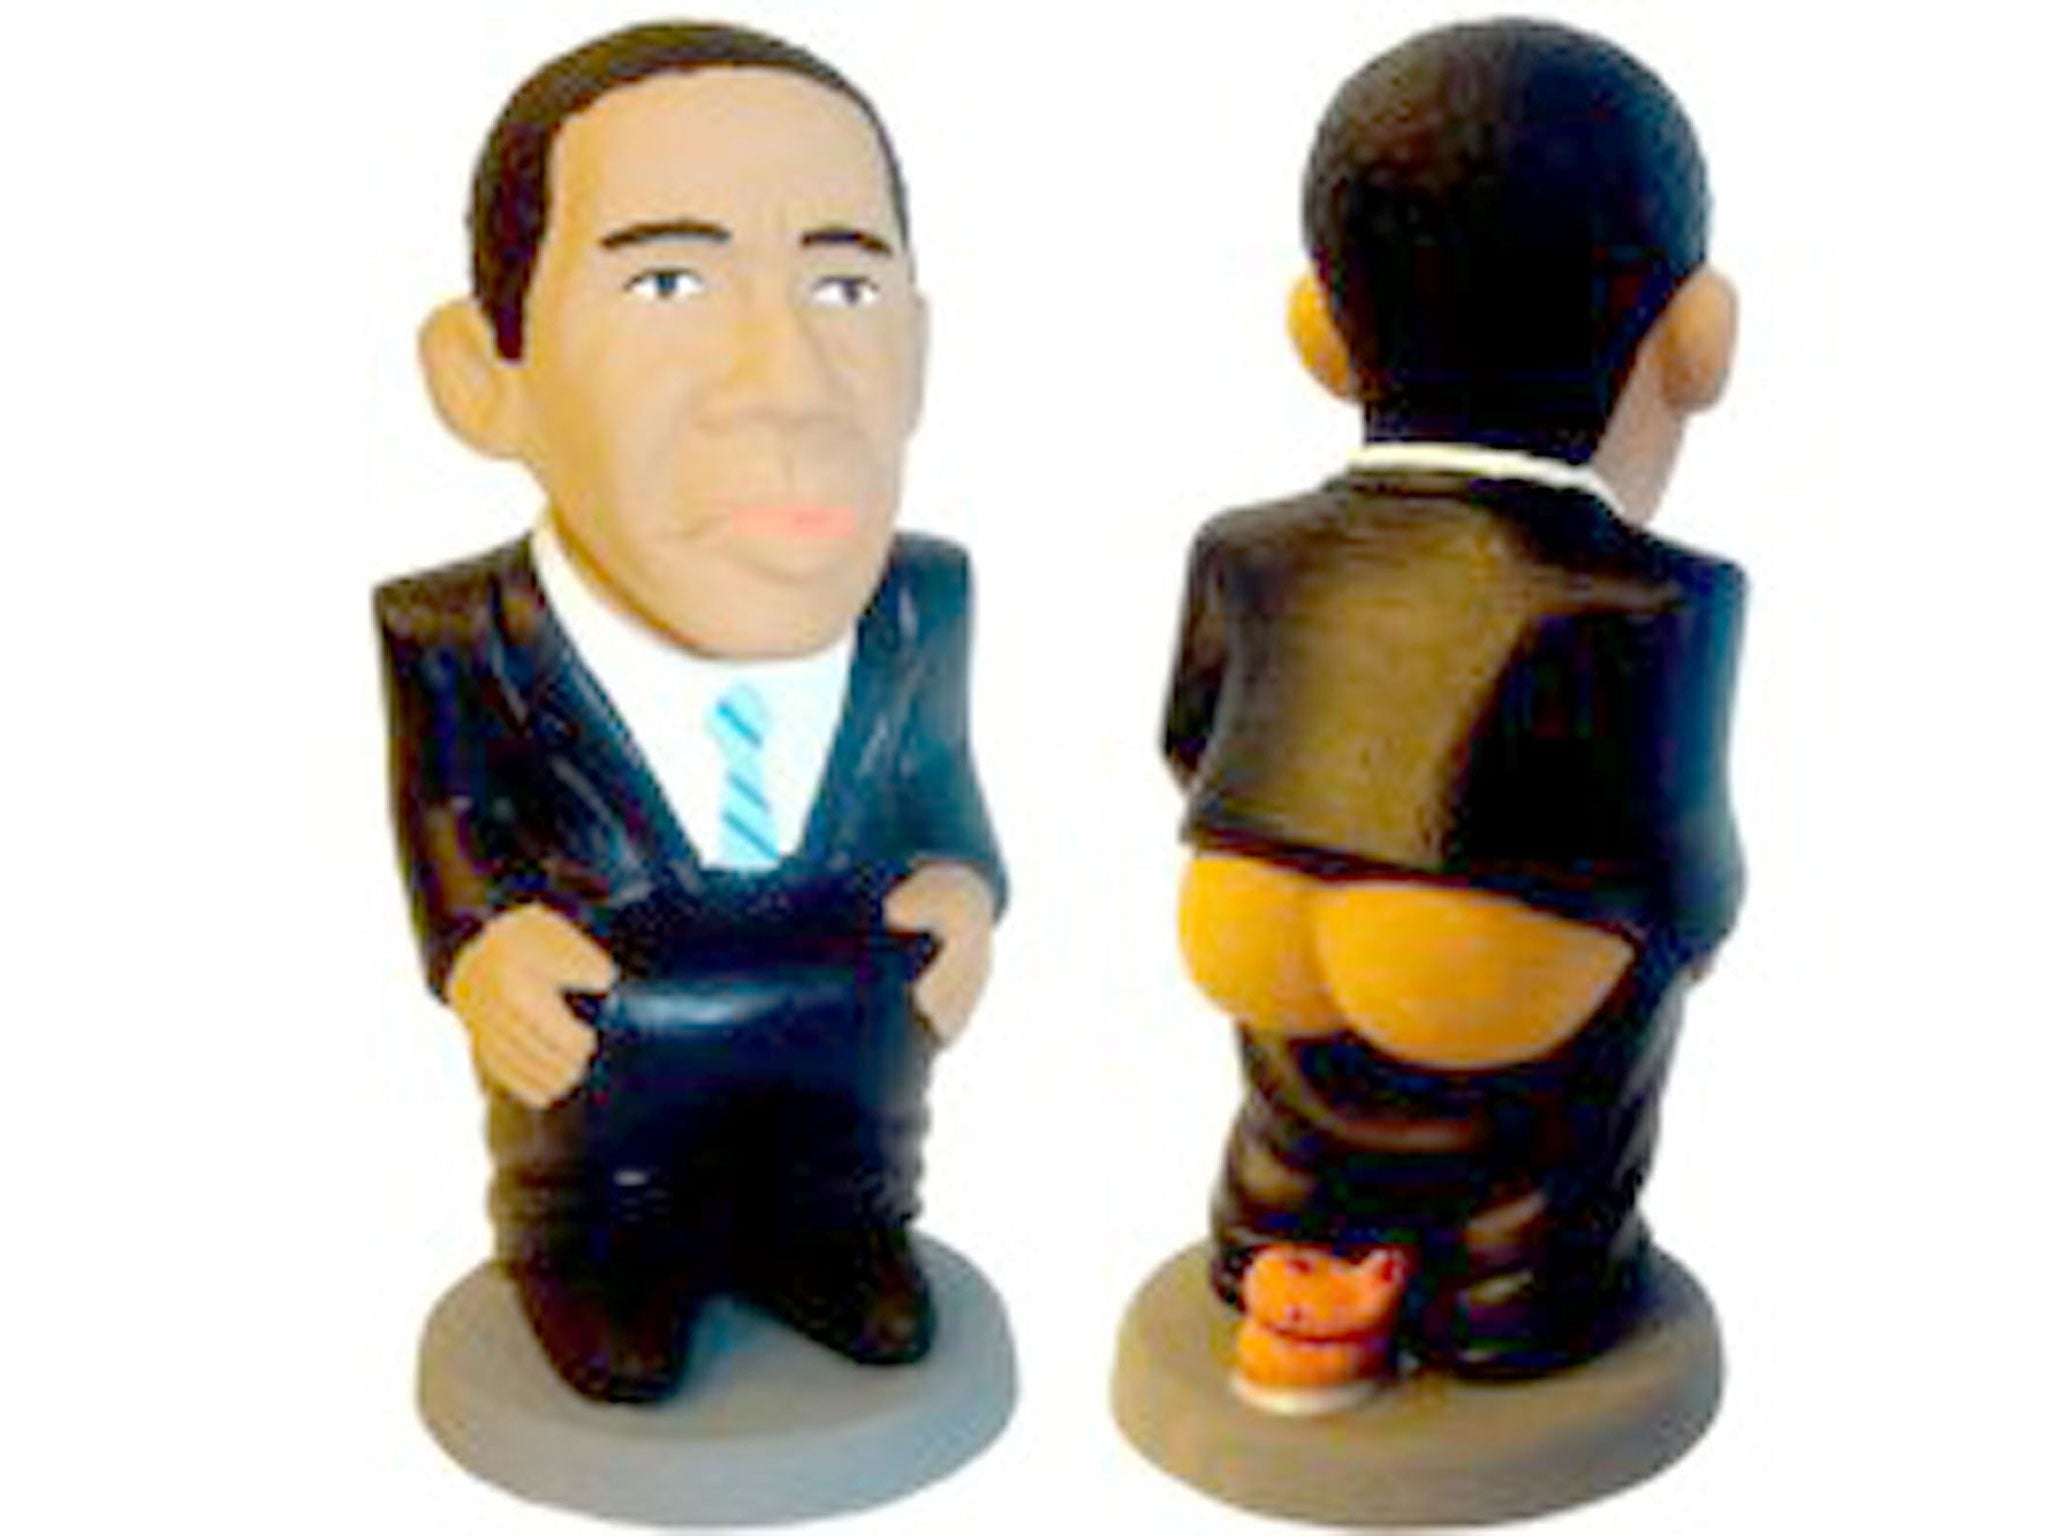 Barack Obama’s ‘caganer’ model – one in a series of Catalan Christmas toys dating back centuries